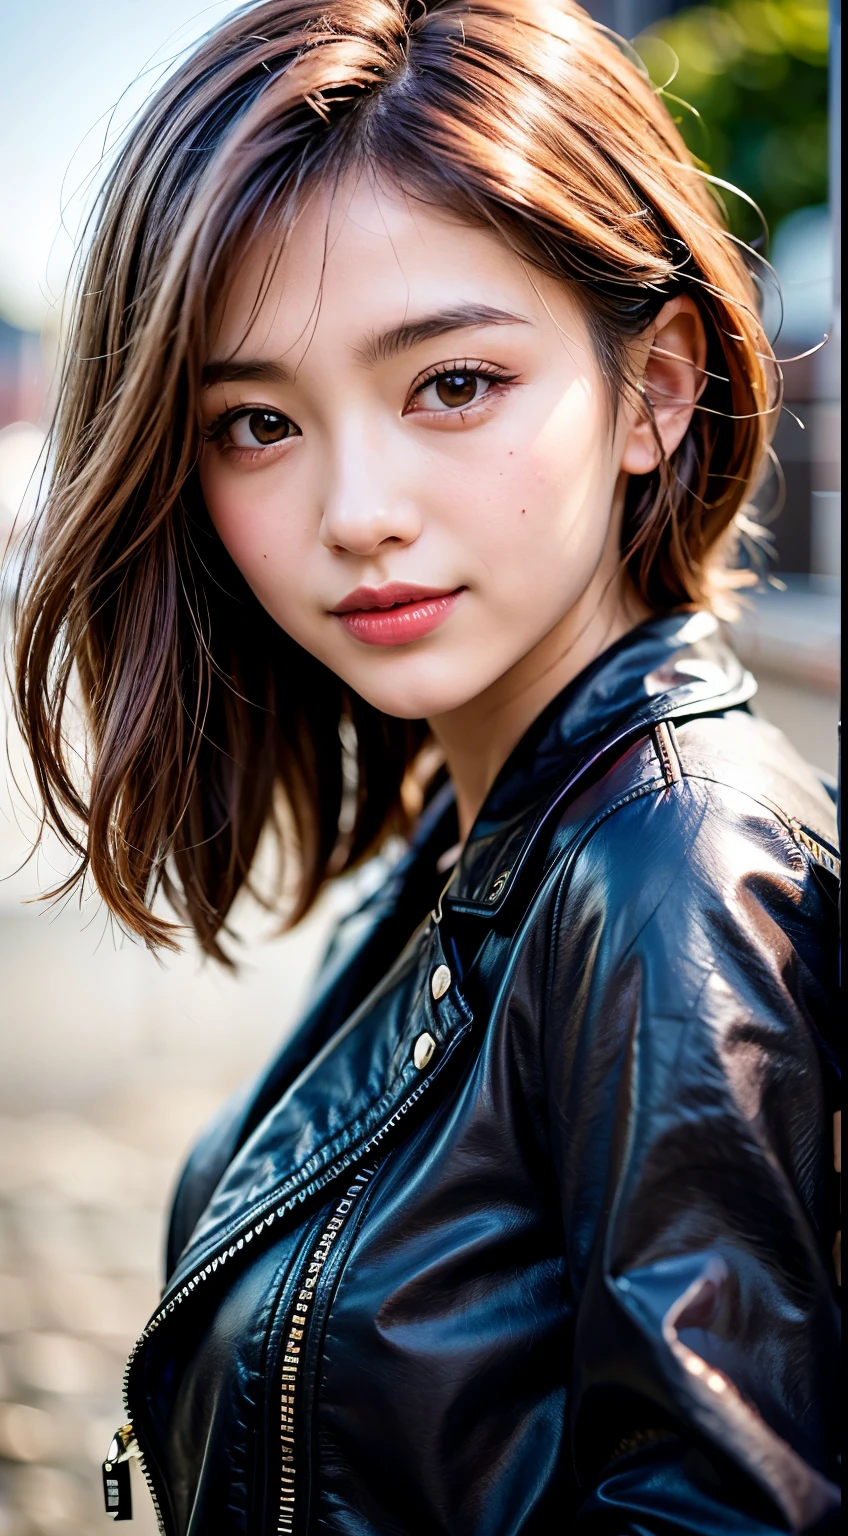 A gentle and lovely Japanese woman,Medium Hair, Blonde Hair,double eyelid, Clever pink eyes, Pink Lips, small, upturned nose, smile,Black Leather Jacket, ヘアスタイルのClose-up,Close-up, Arms crossed,Four fingers and a thumb,Natural light